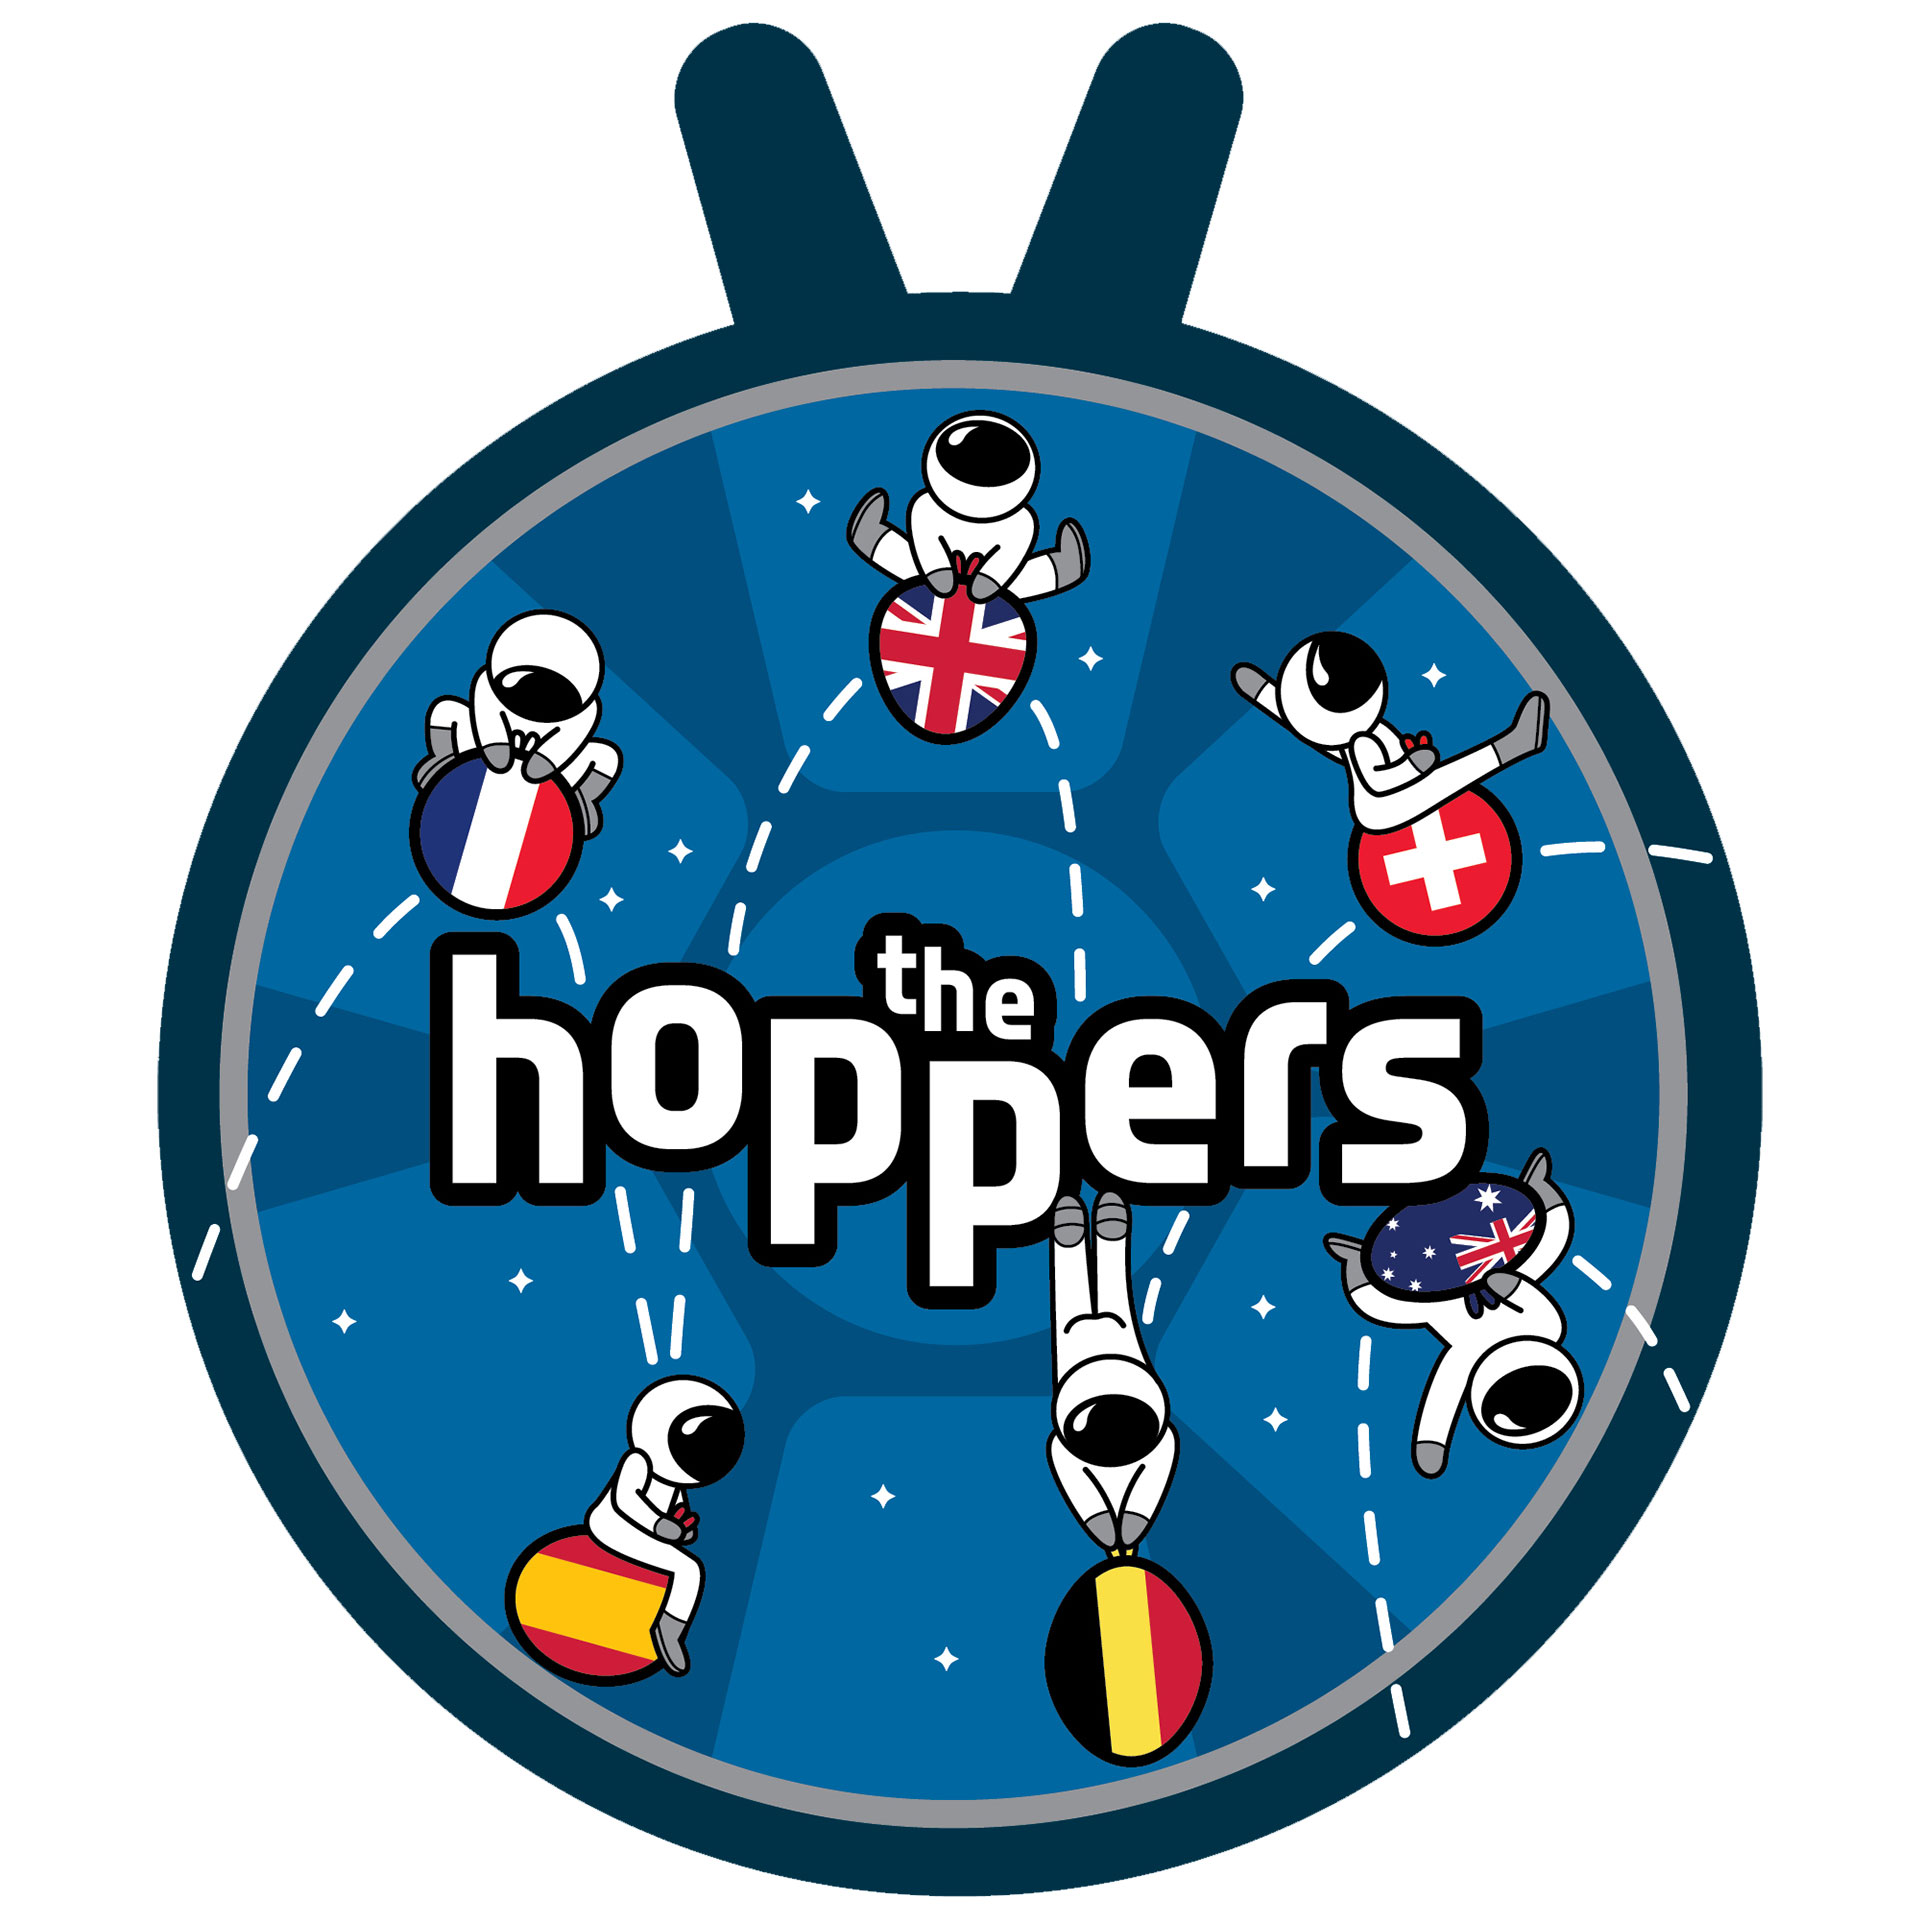 mission patch for the european space agency's 2022 astronaut class "the hoppers," showing six spacesuited cartoon astronauts with their nation's respective flag.